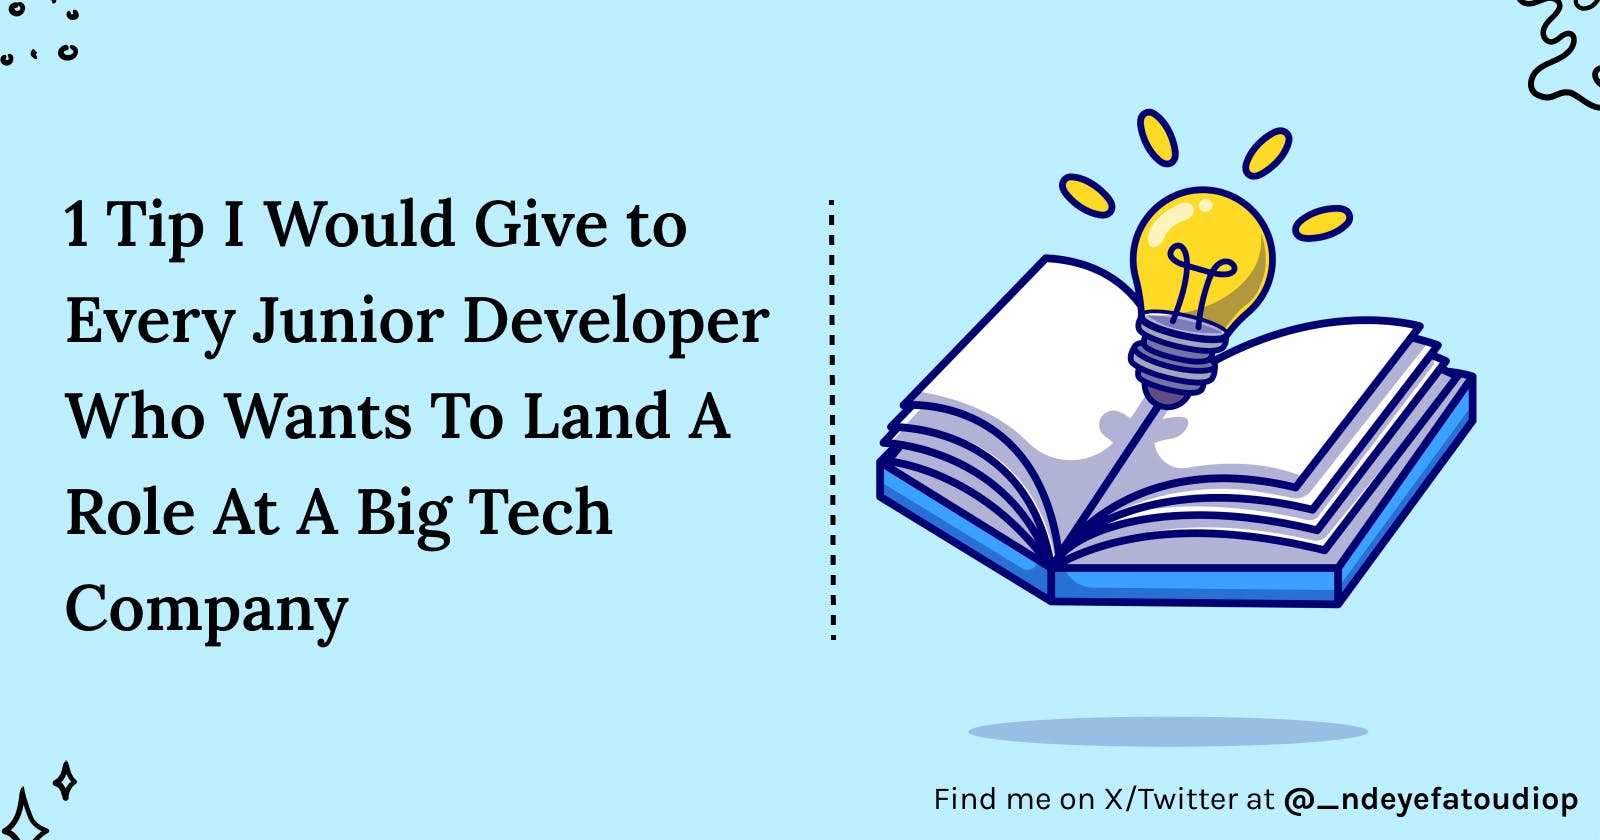 1 Tip I Would Give to Every Junior Developer Who Wants To Land A Role At A Big Tech Company